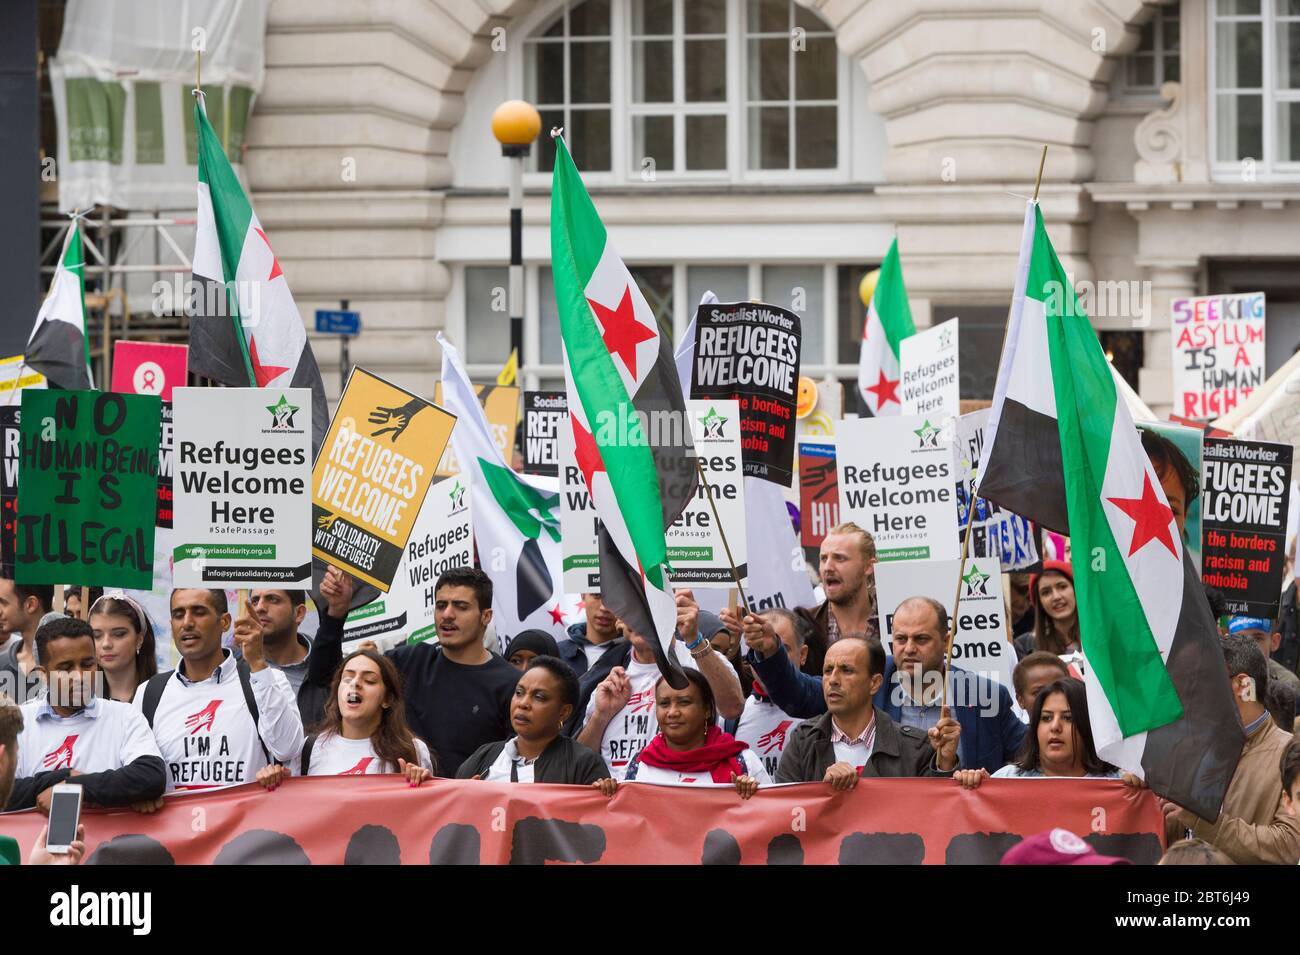 ‘Refugees Welcome Here’ march from Park Lane to Parliament Square to show solidarity with refugees, Piccadilly, London, UK.  17 Sep 2016 Stock Photo